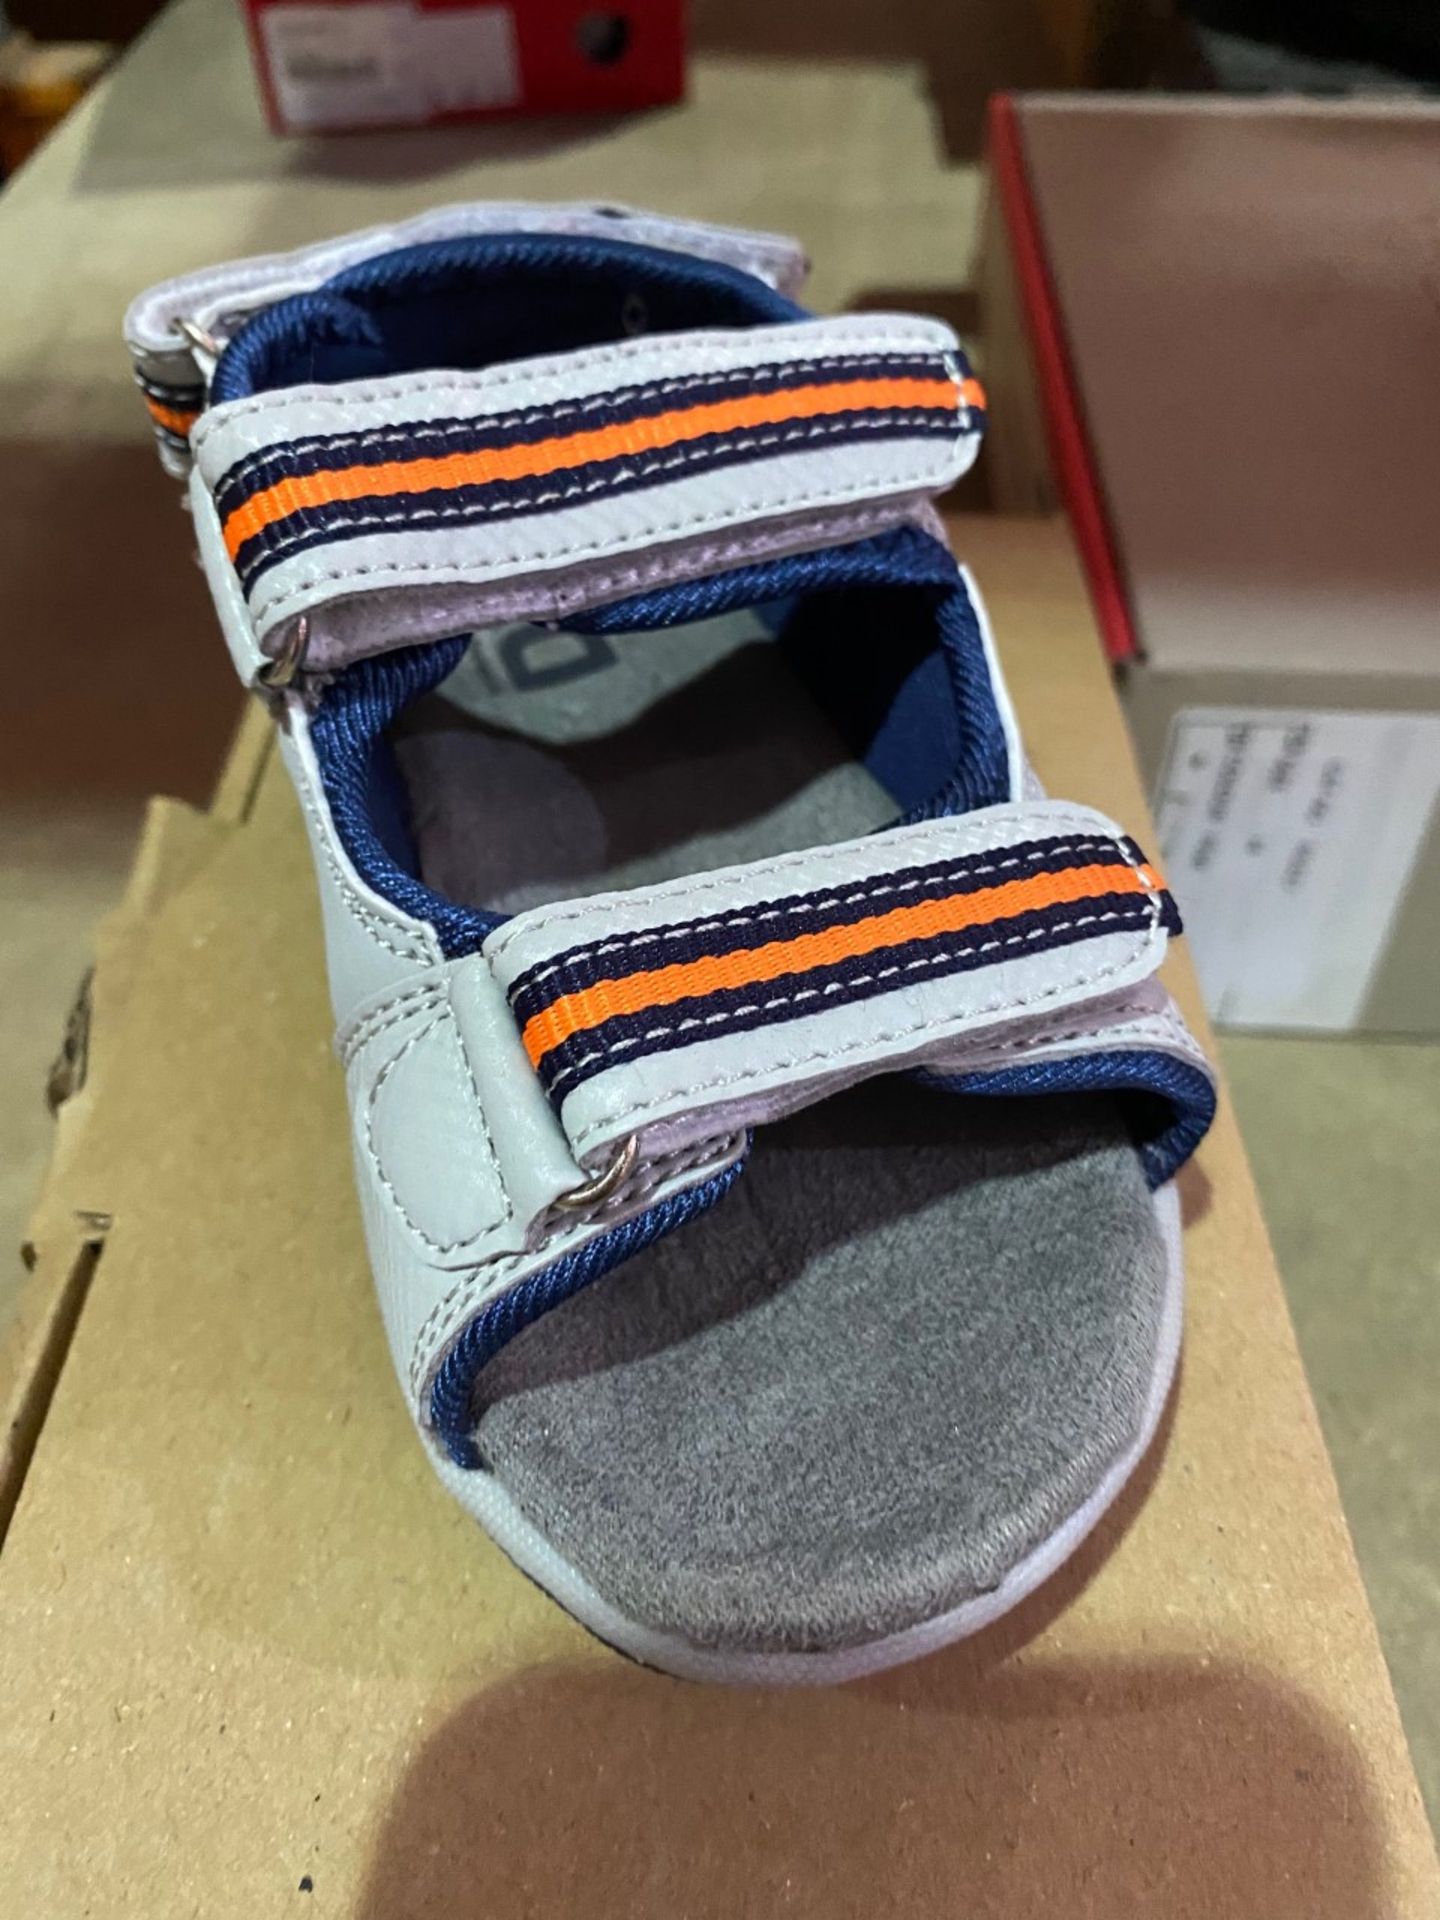 NEW & BOXED THE KIDS DIVISION GREY SANDAL SIZE INFANT 5